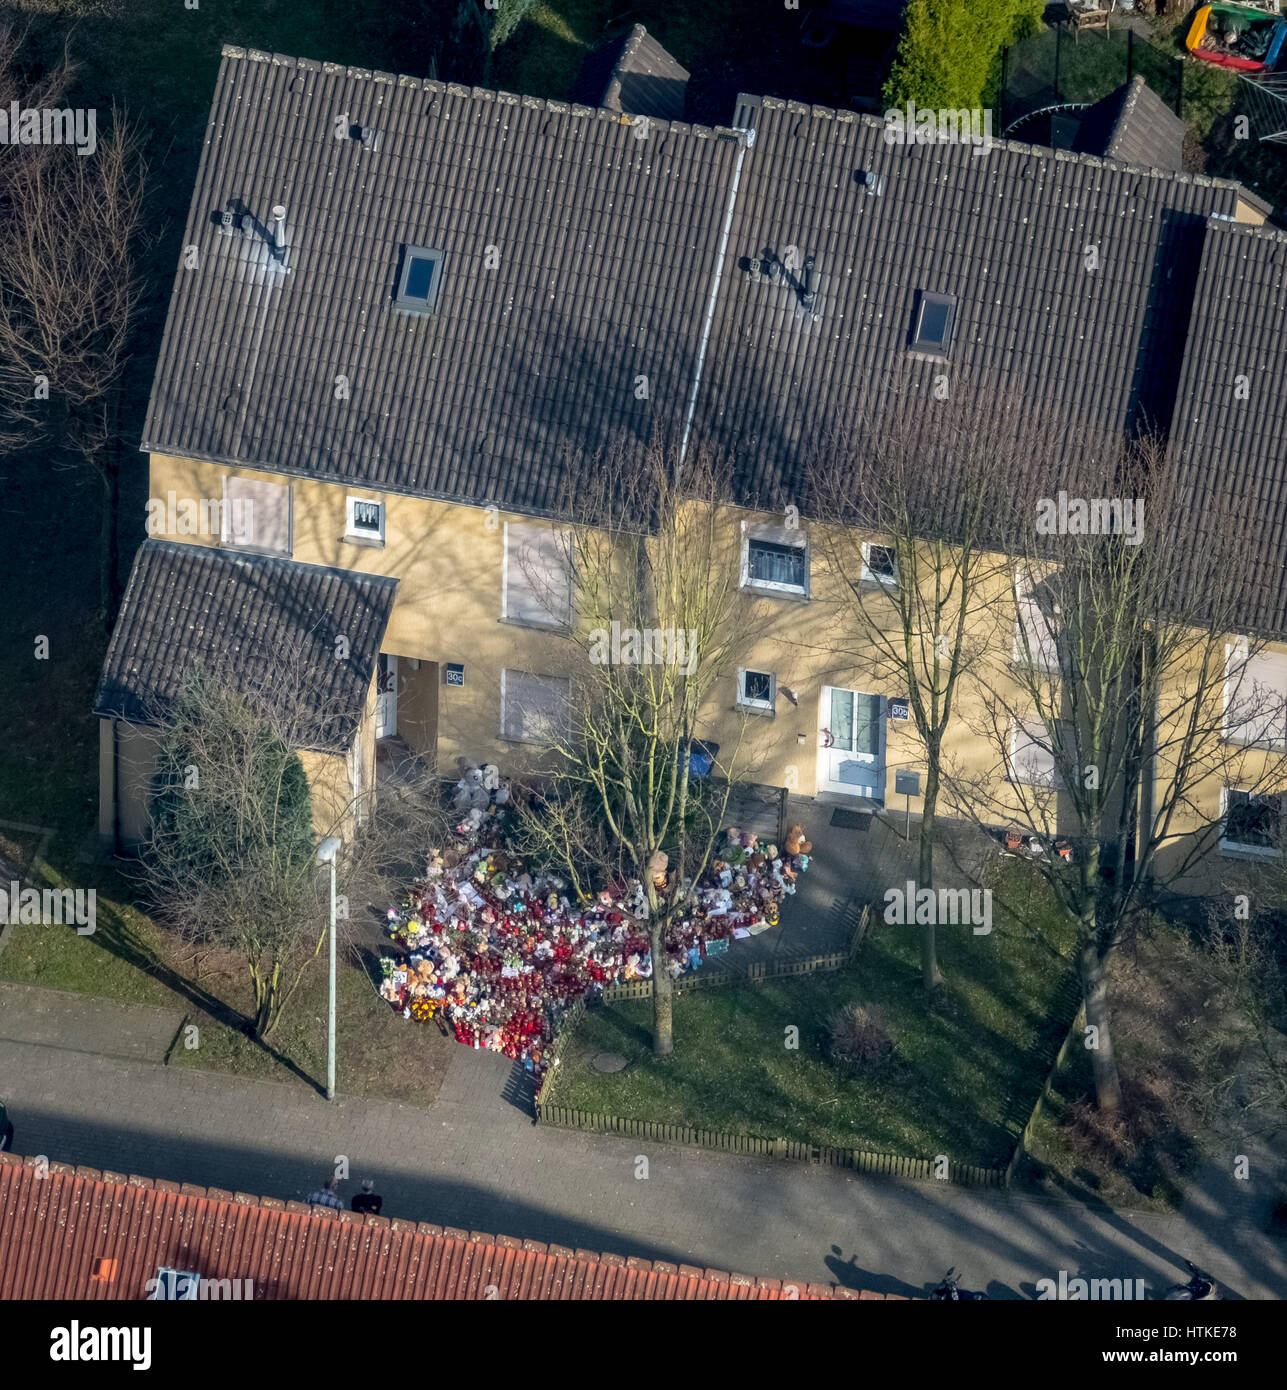 Herne child murder case, Settlement in Dannekamp, home of murderer Marcel Hesse and the nine-year-old victim, toys and candles in front of the house, Herne, Ruhr area, North Rhine-Westphalia, Germany Stock Photo